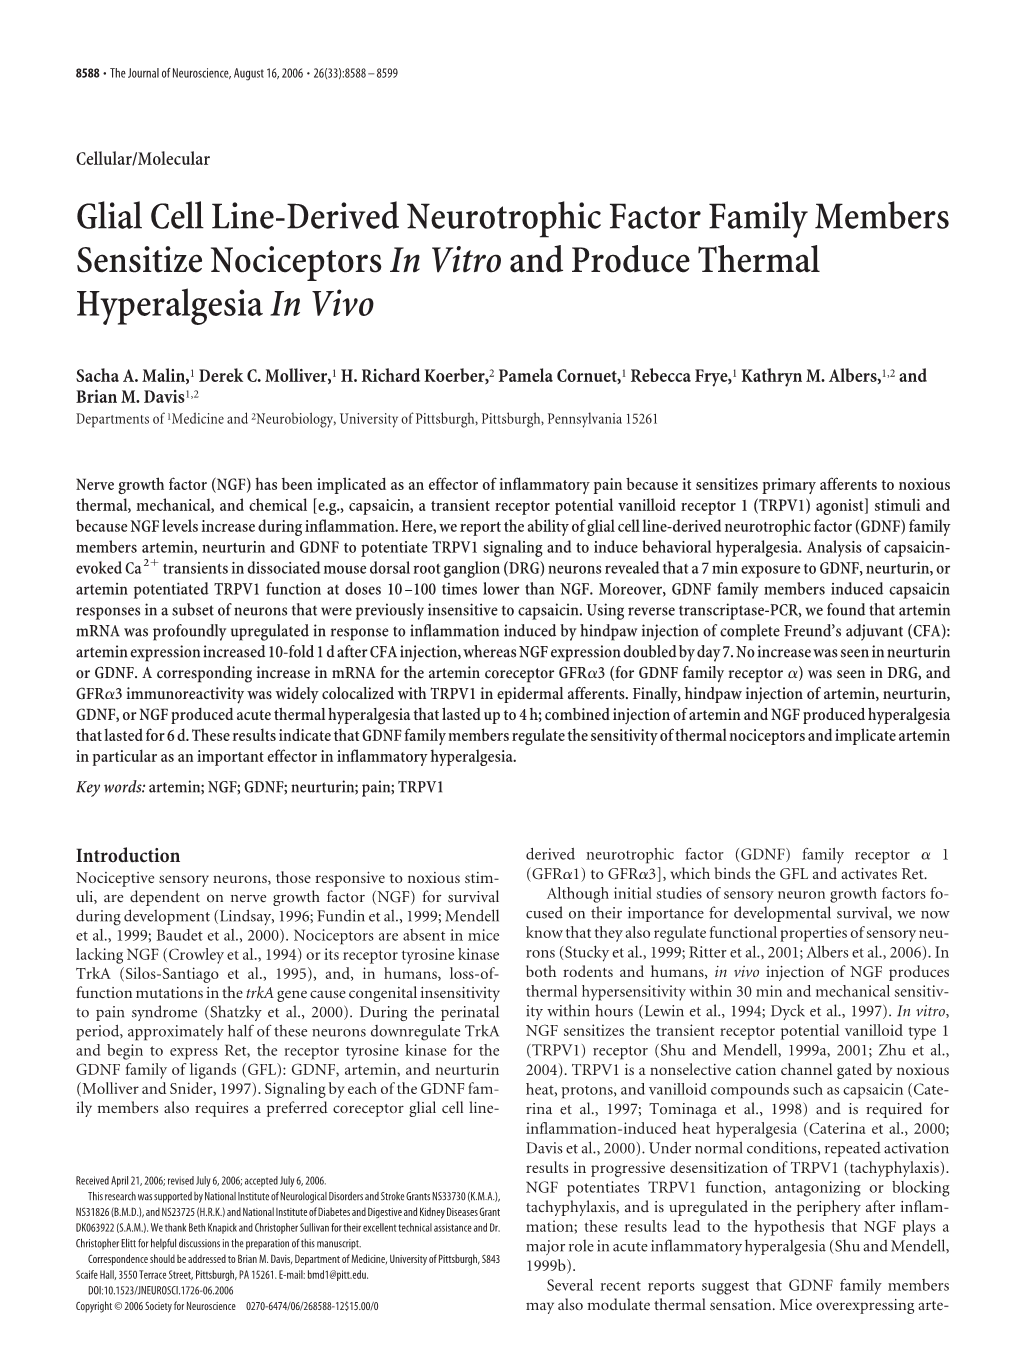 Glial Cell Line-Derived Neurotrophic Factor Family Members Sensitize Nociceptors in Vitro and Produce Thermal Hyperalgesia in Vivo